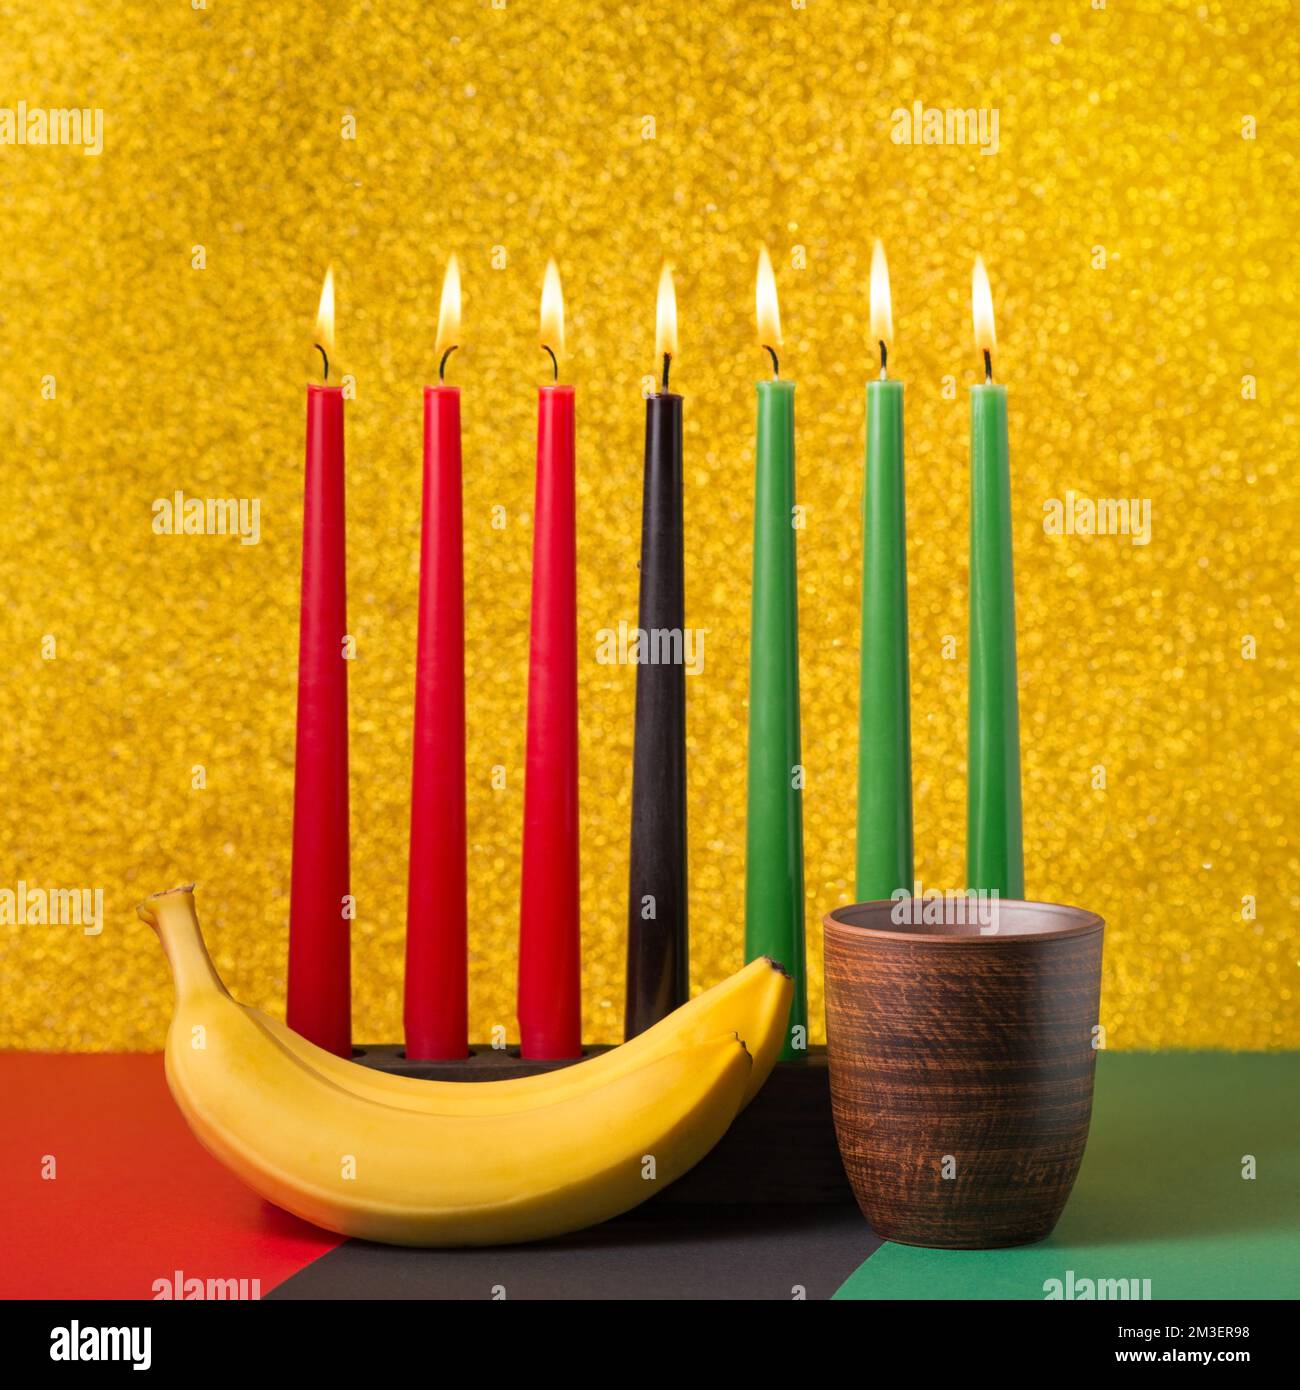 Kwanzaa holiday hi-res stock photography and images - Page 4 - Alamy